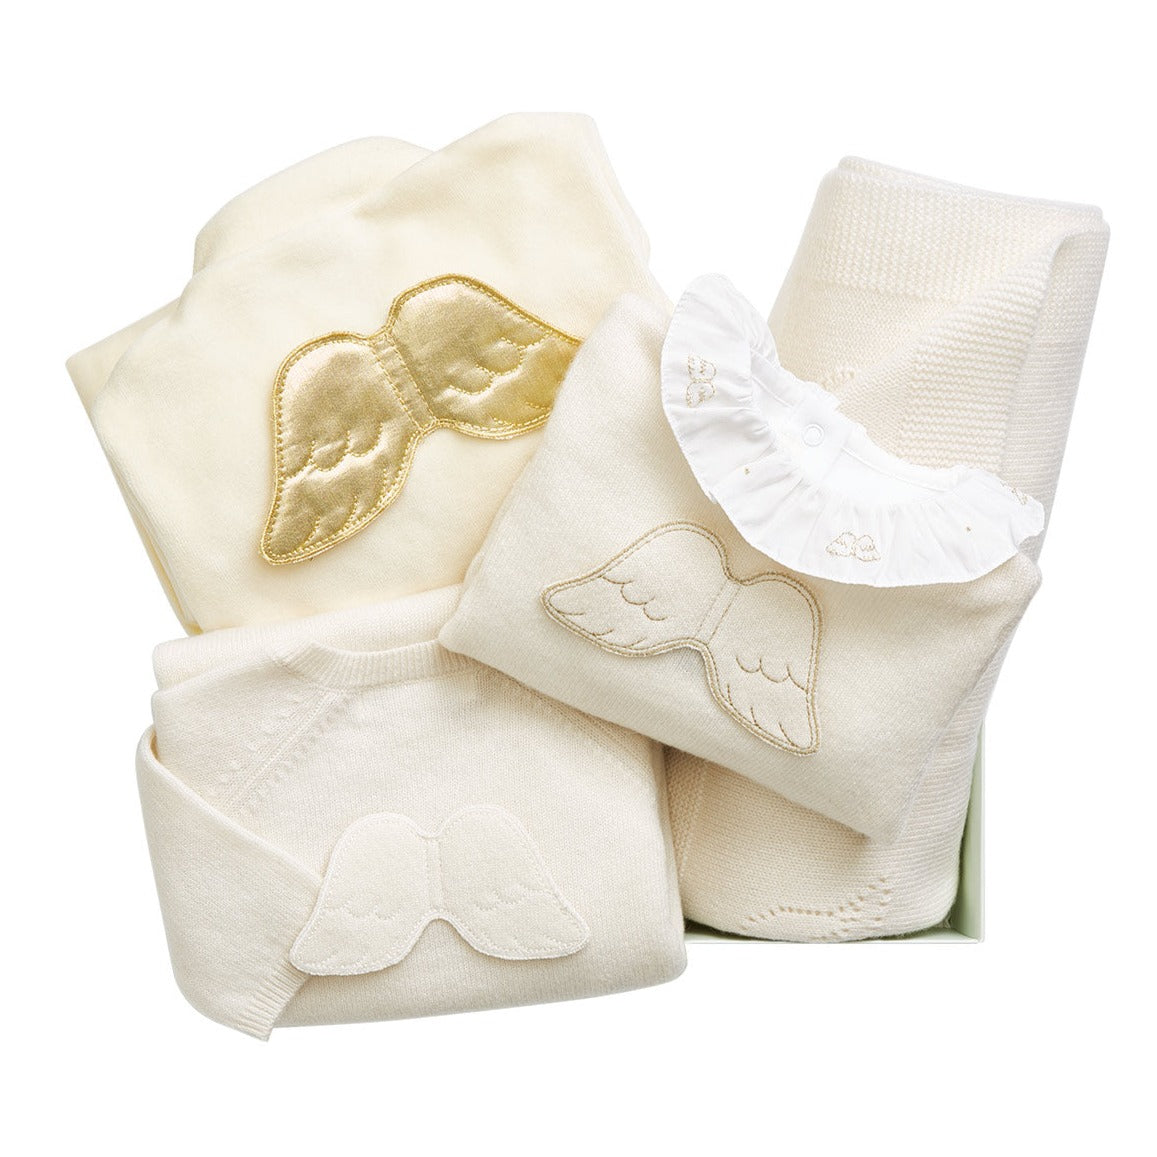 Luxury Cashmere Baby Gift Set by Marie Chantal at Bonjour Baby Baskets